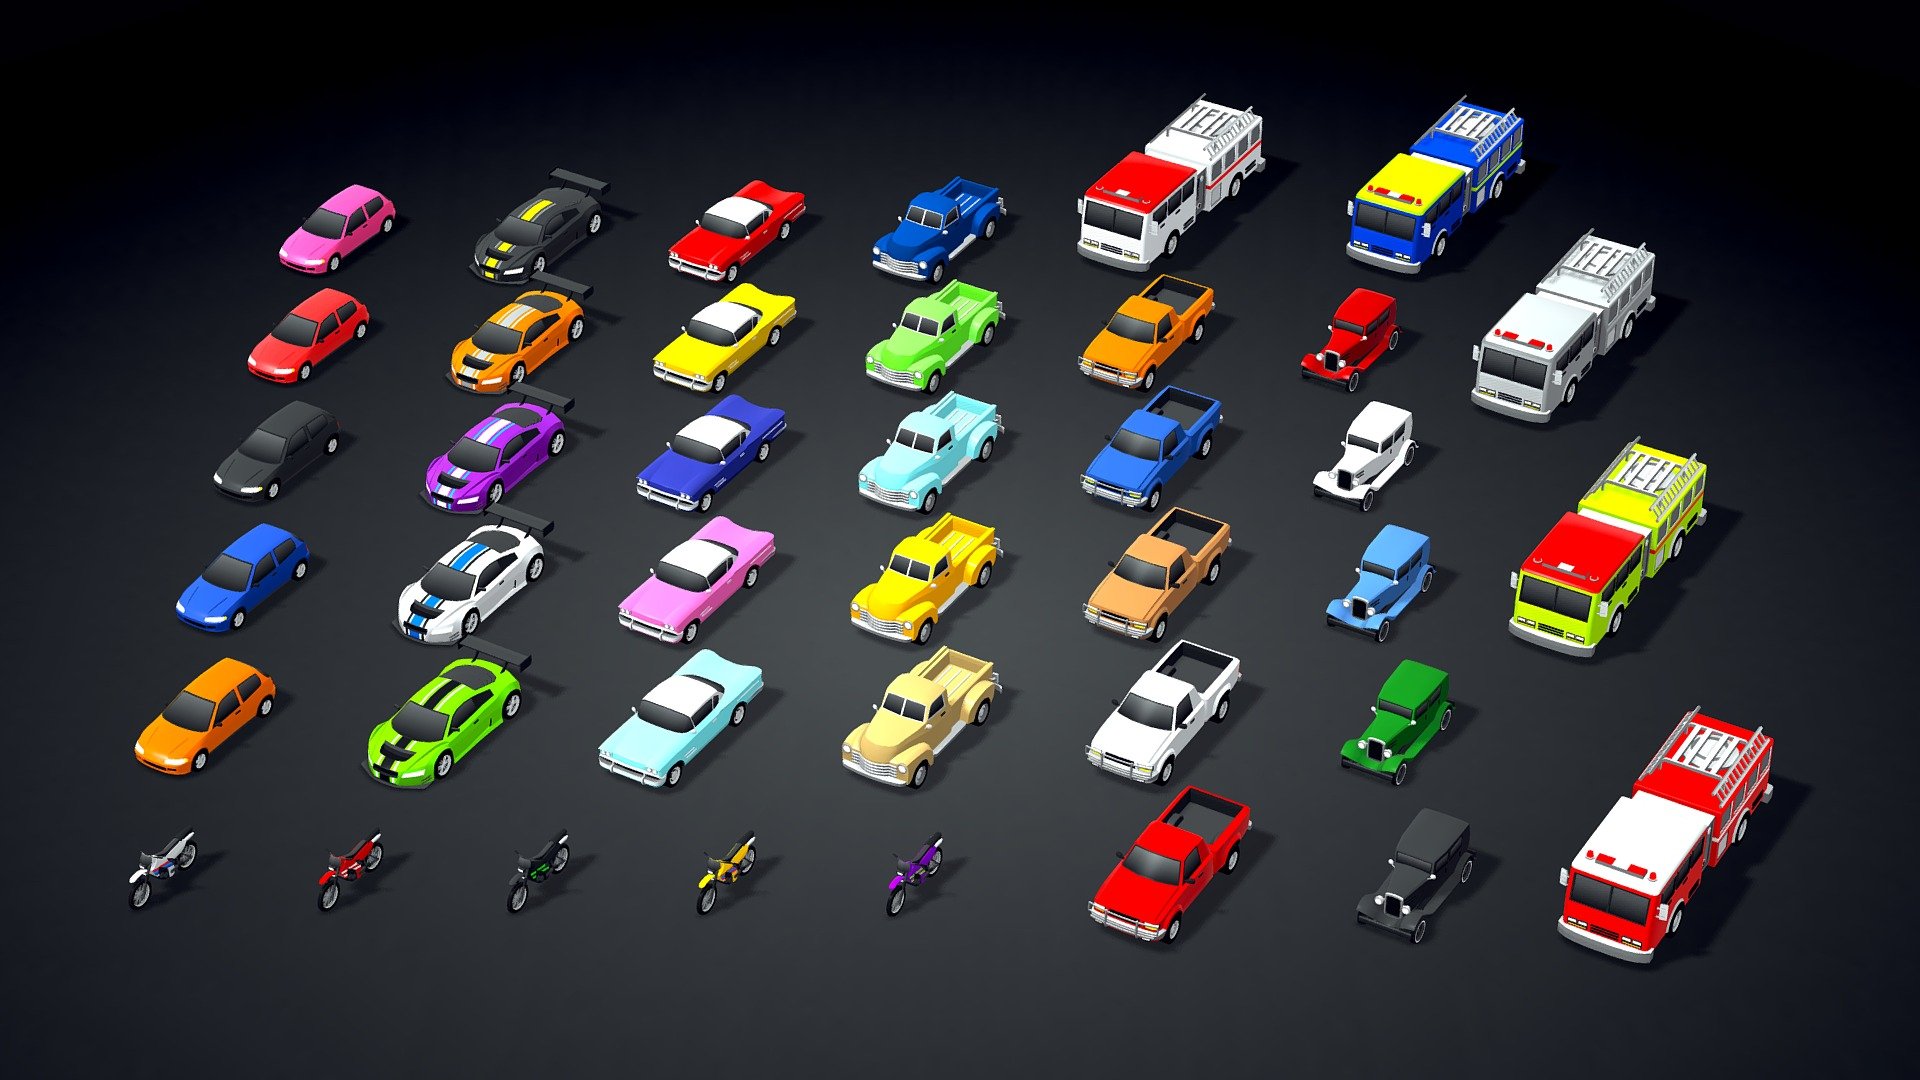 This is the FREE October update (2021) of my asset called “ARCADE: Ultimate Vehicles Pack”. It will be launched on the 1st of October 2021.

This asset is available for Unity3D (in the Unity Asset Store), Unreal Engine (in the Unreal Engine Marketplace) and Sketchfab.

The update includes 4 new cars, 2 trucks, 1 motorcycle and 1 fire truck for free 3d model